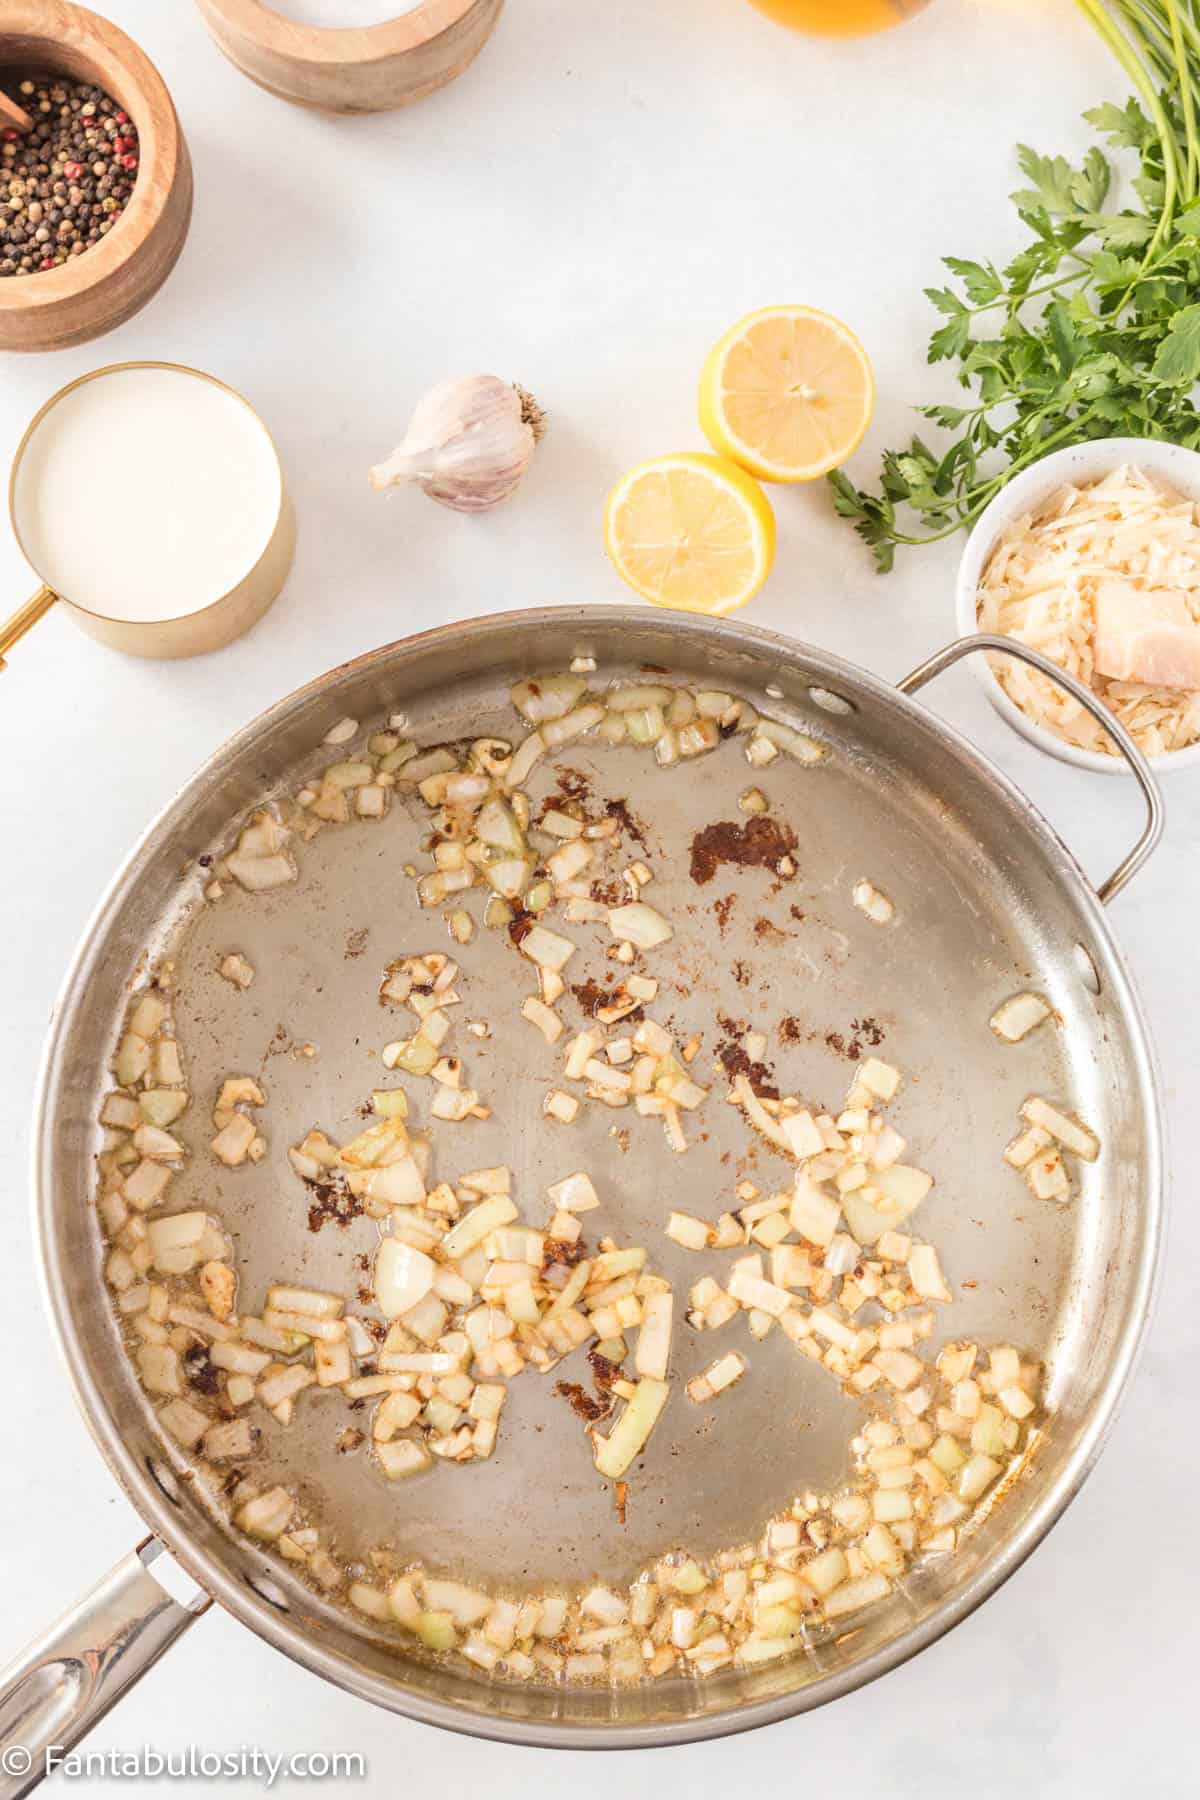 A pan is centered with onions and garlic sauteeing in olive oil for Creamy Lemon Chicken Pasta